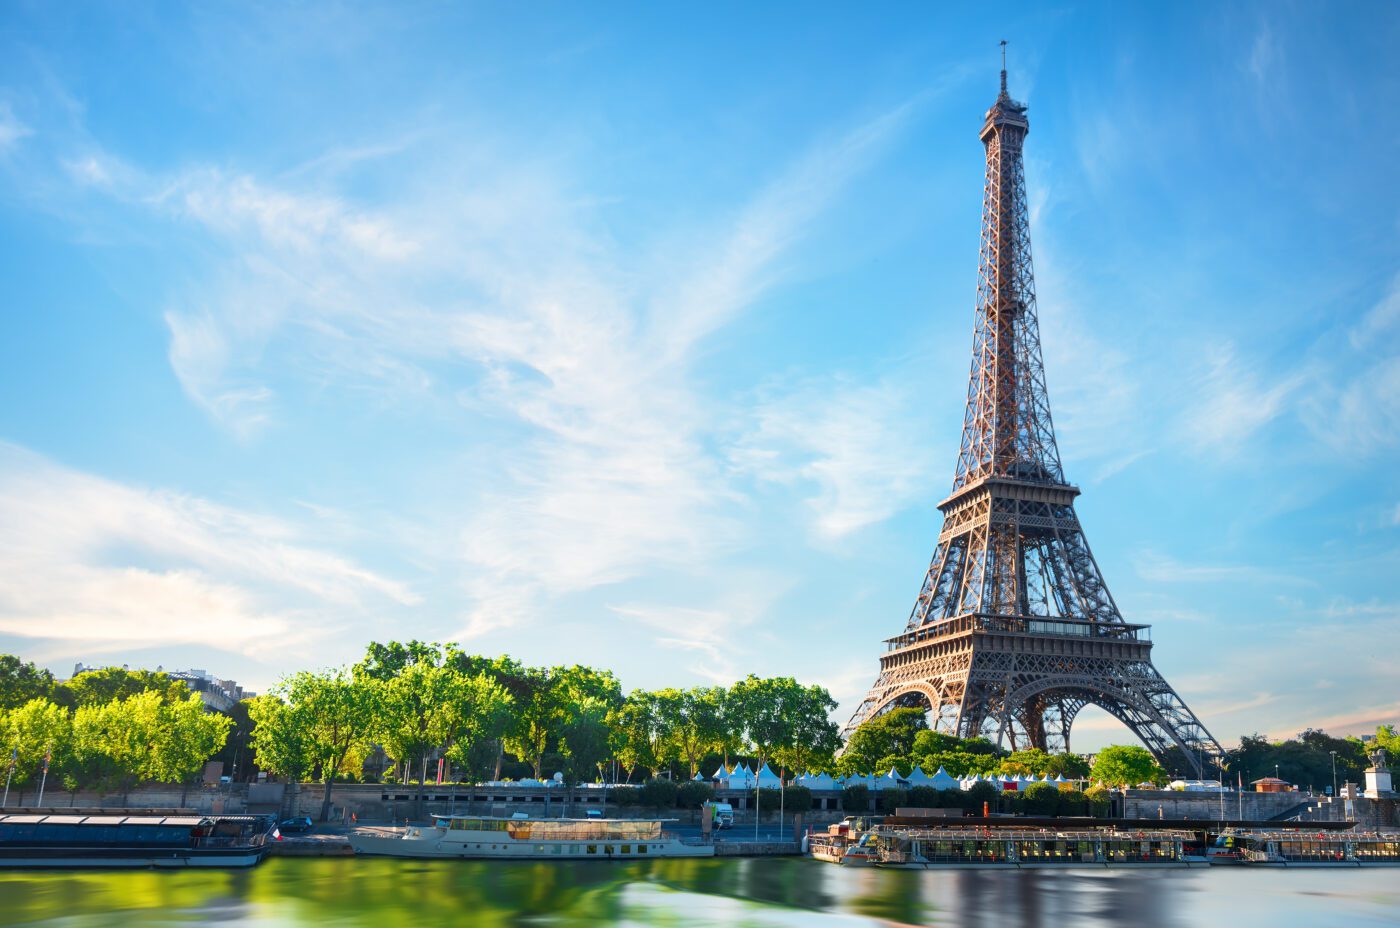 The Eiffel Tower and River Seine in Paris, host of the 2024 Olympic Games